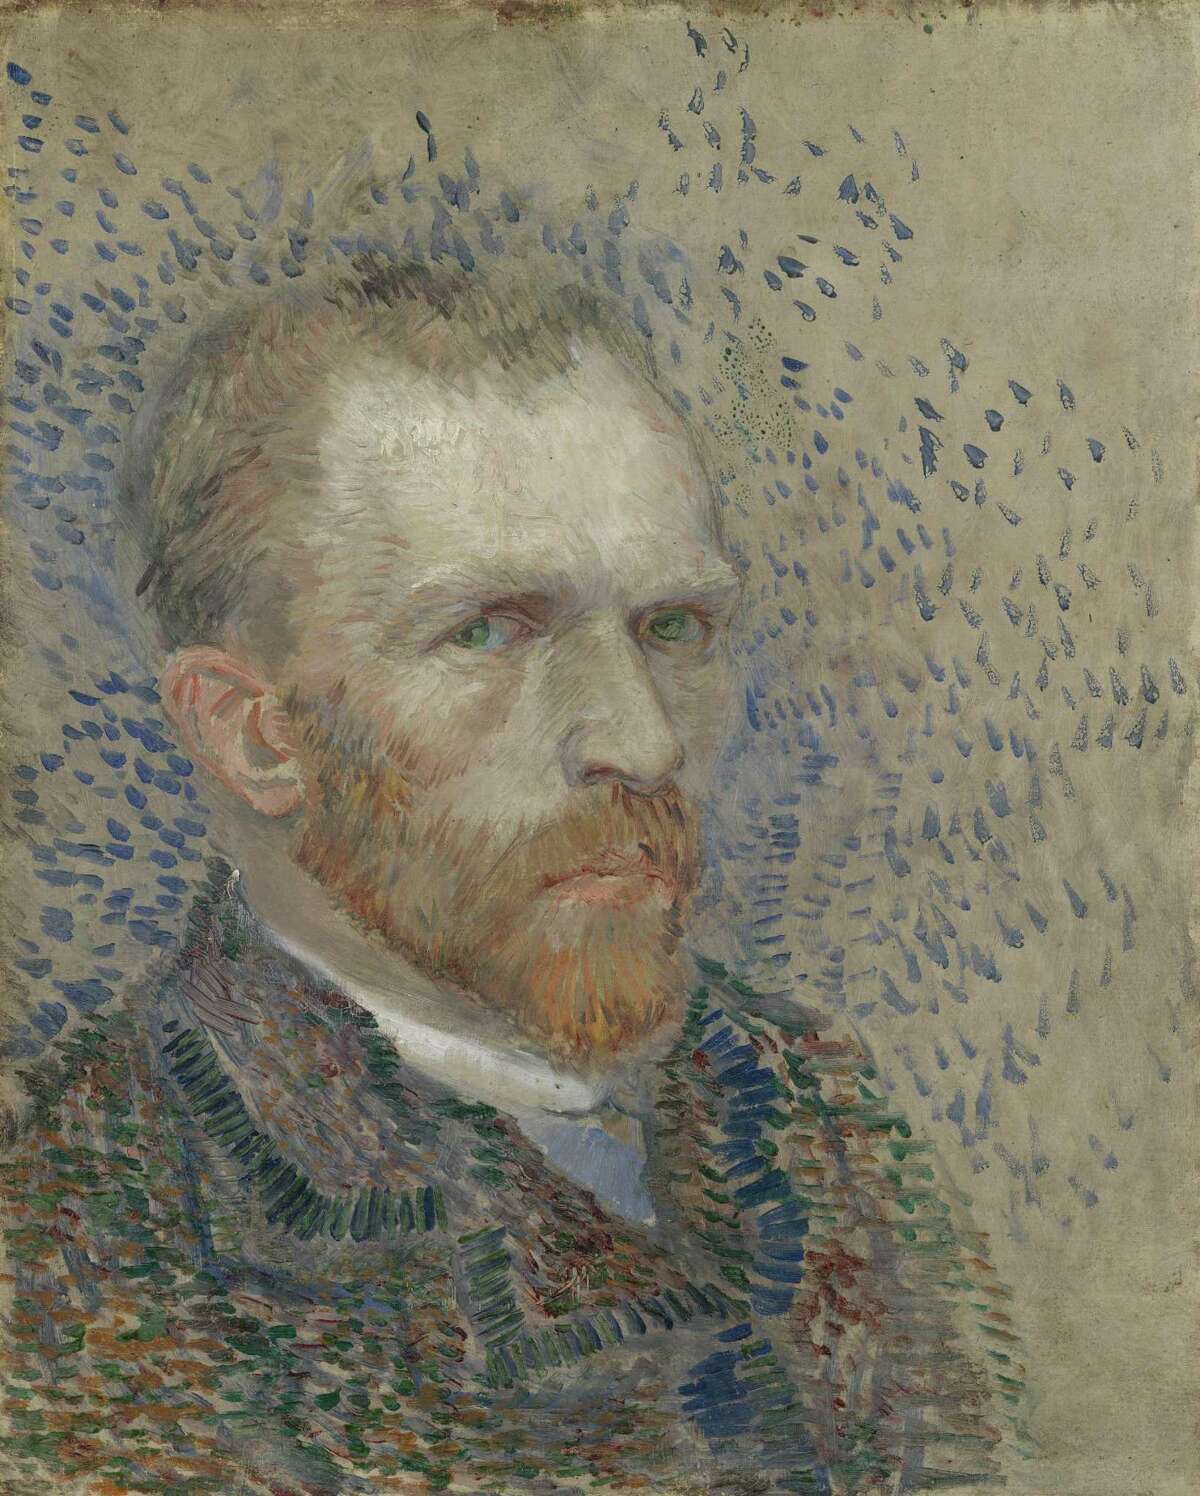 A Vincent van Gogh "Self-Portrait" from 1887 was on view.